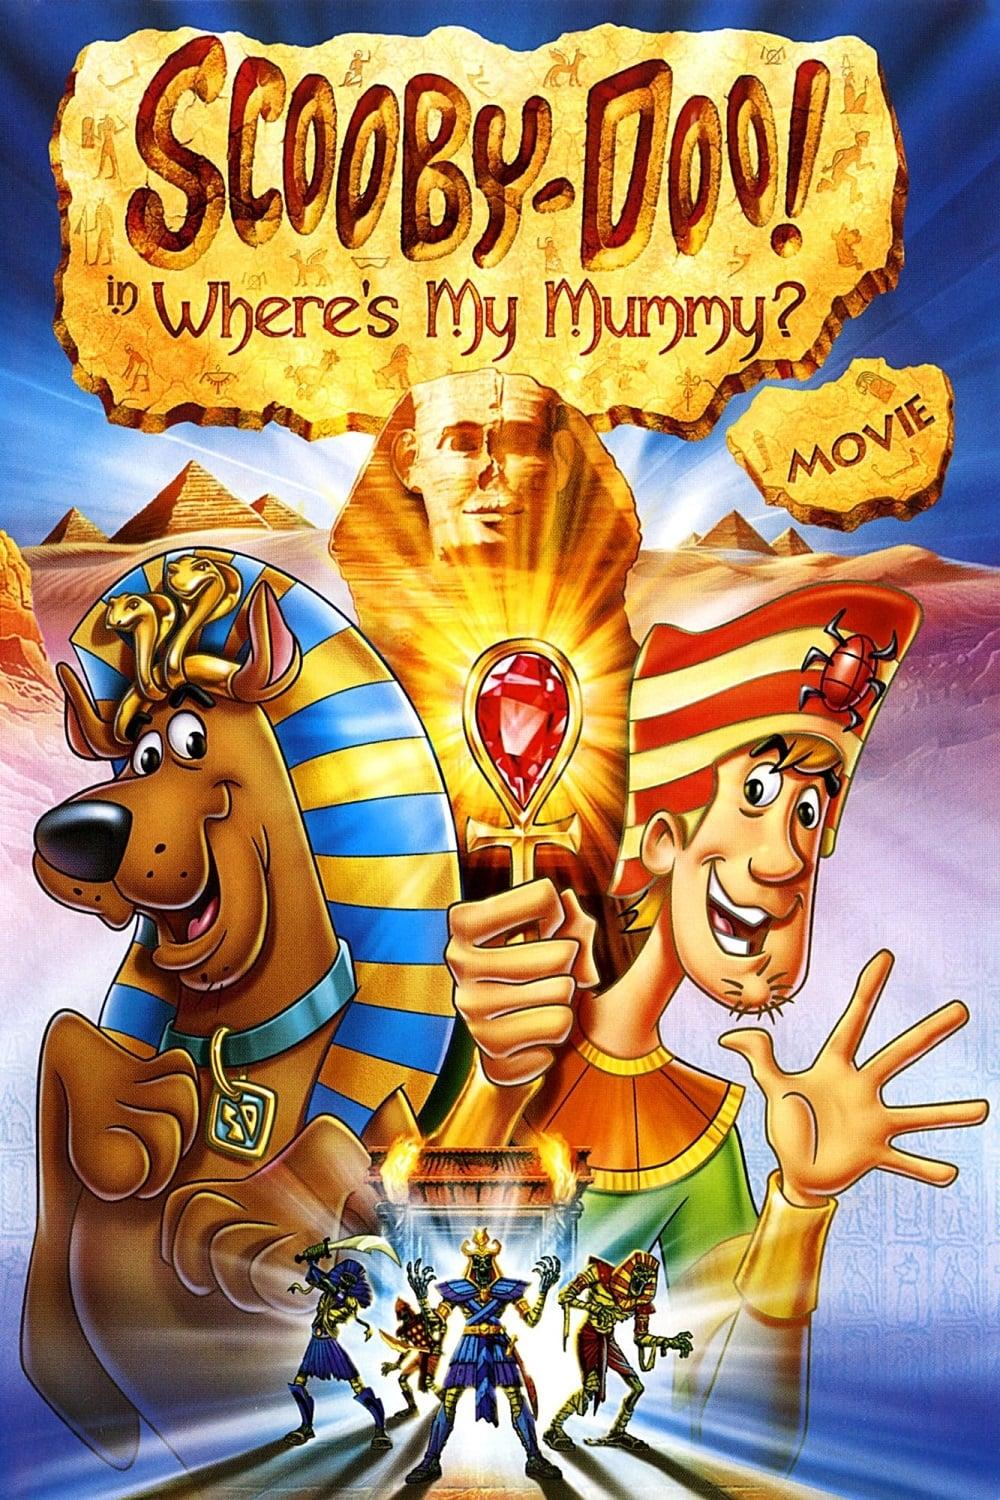 Scooby-Doo! in Where's My Mummy? poster